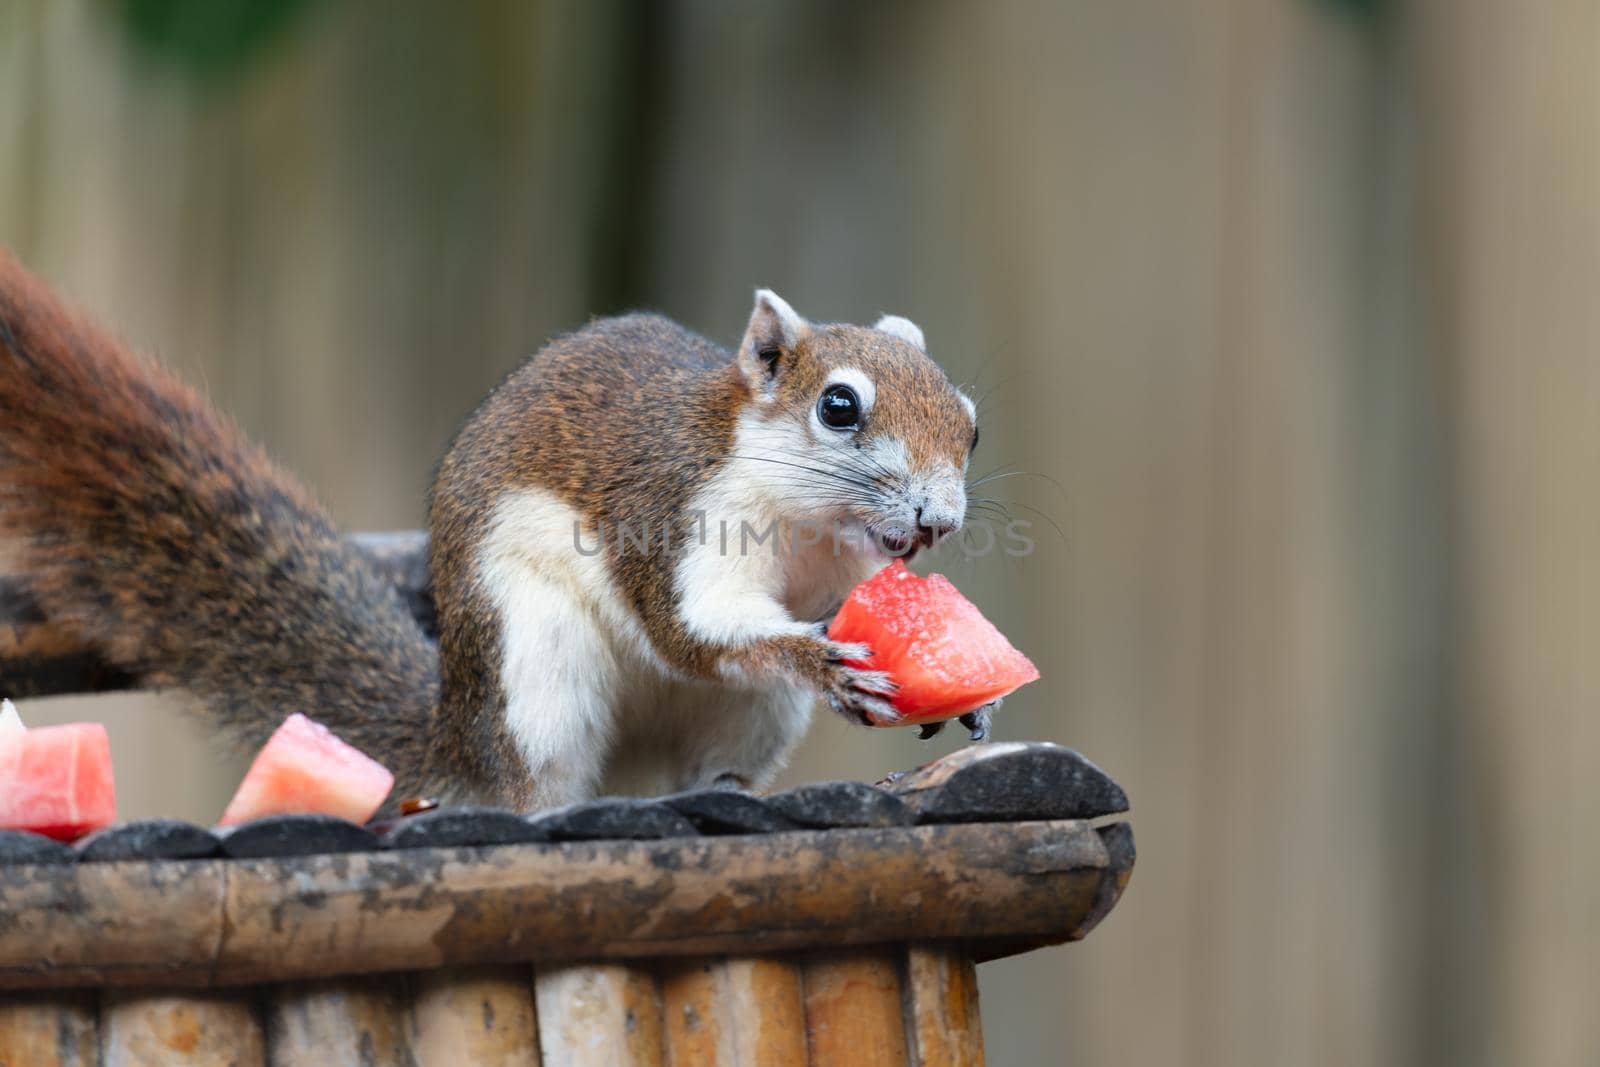 Squirrel eating fruit at chaweng beach in Samui Island, Thailand by toa55